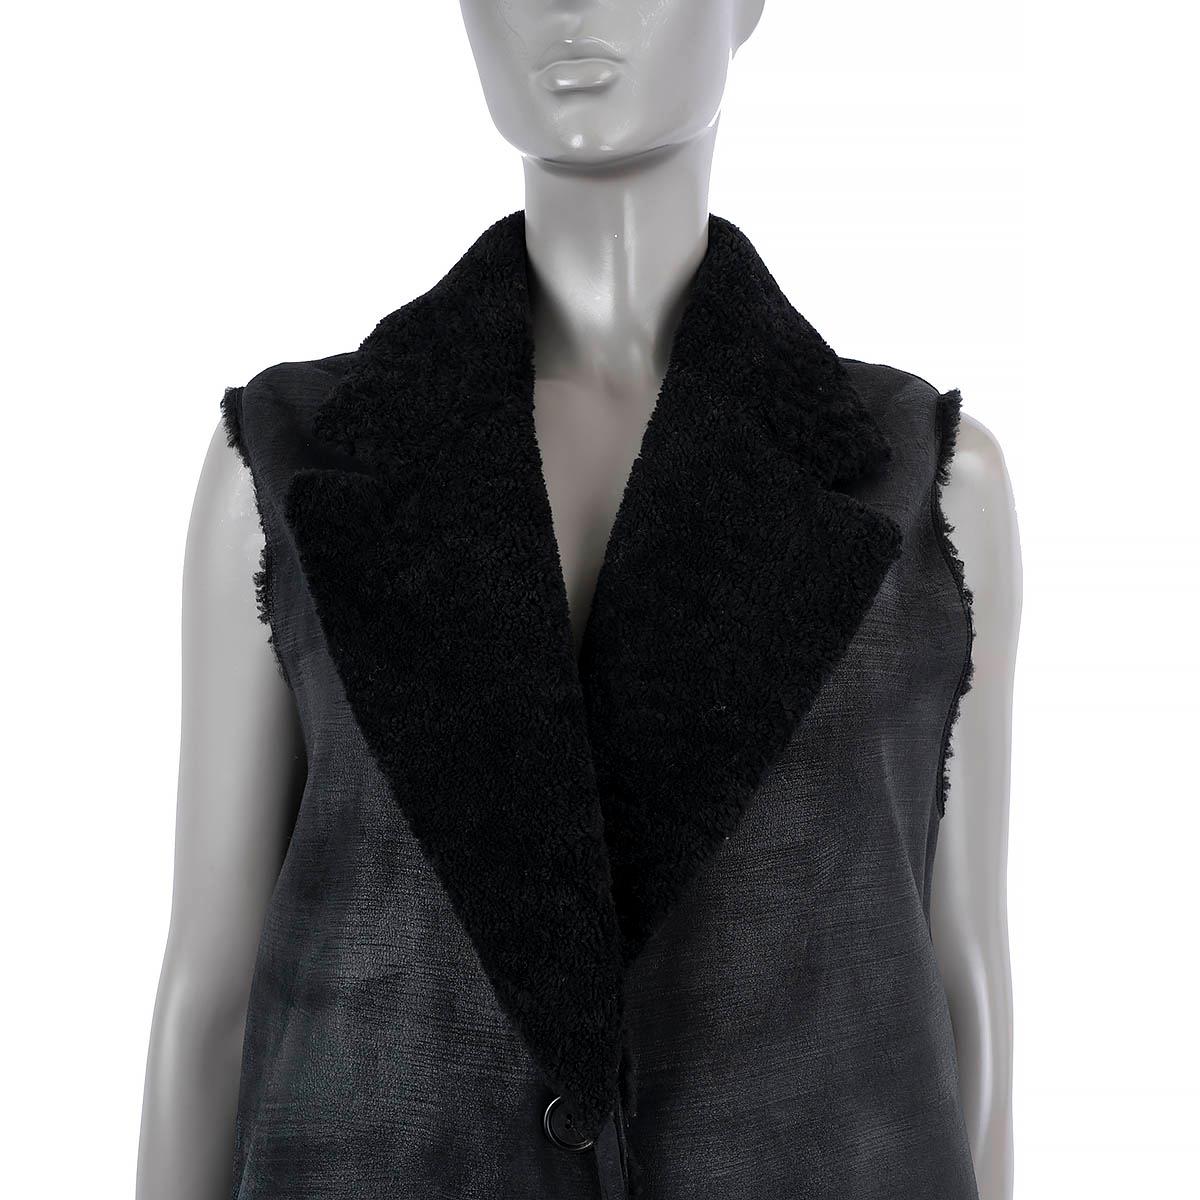 PRADA black 2020 SHEARLING LINED DISTRESSED SUEDE VEST Coat Jacket 40 S In Excellent Condition For Sale In Zürich, CH